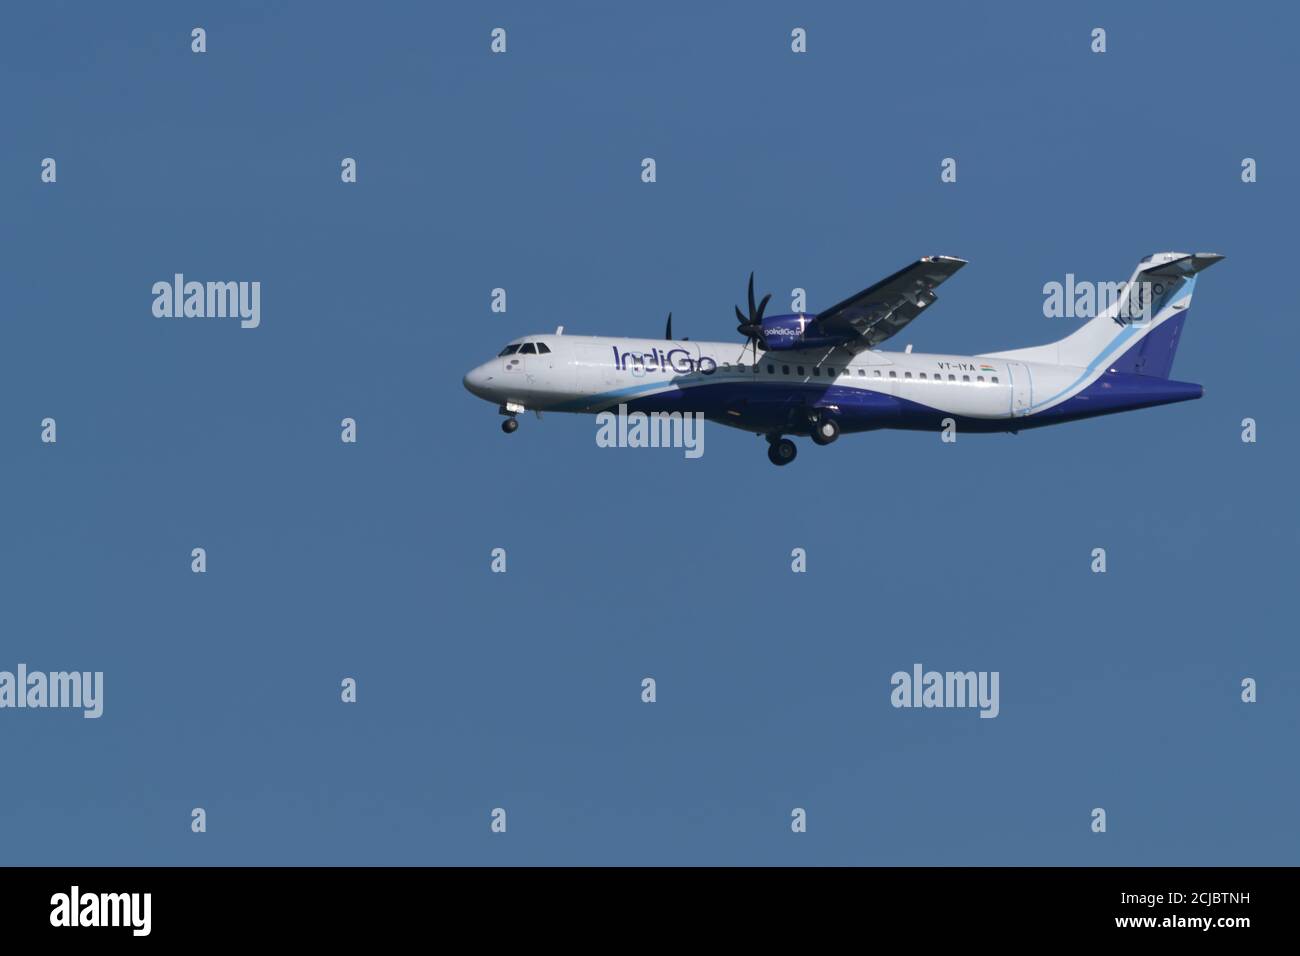 An Indigo Airlines aircraft - an ATR 72, is about to be landing at the Mangalore International Airport in Mangalore, India. Stock Photo